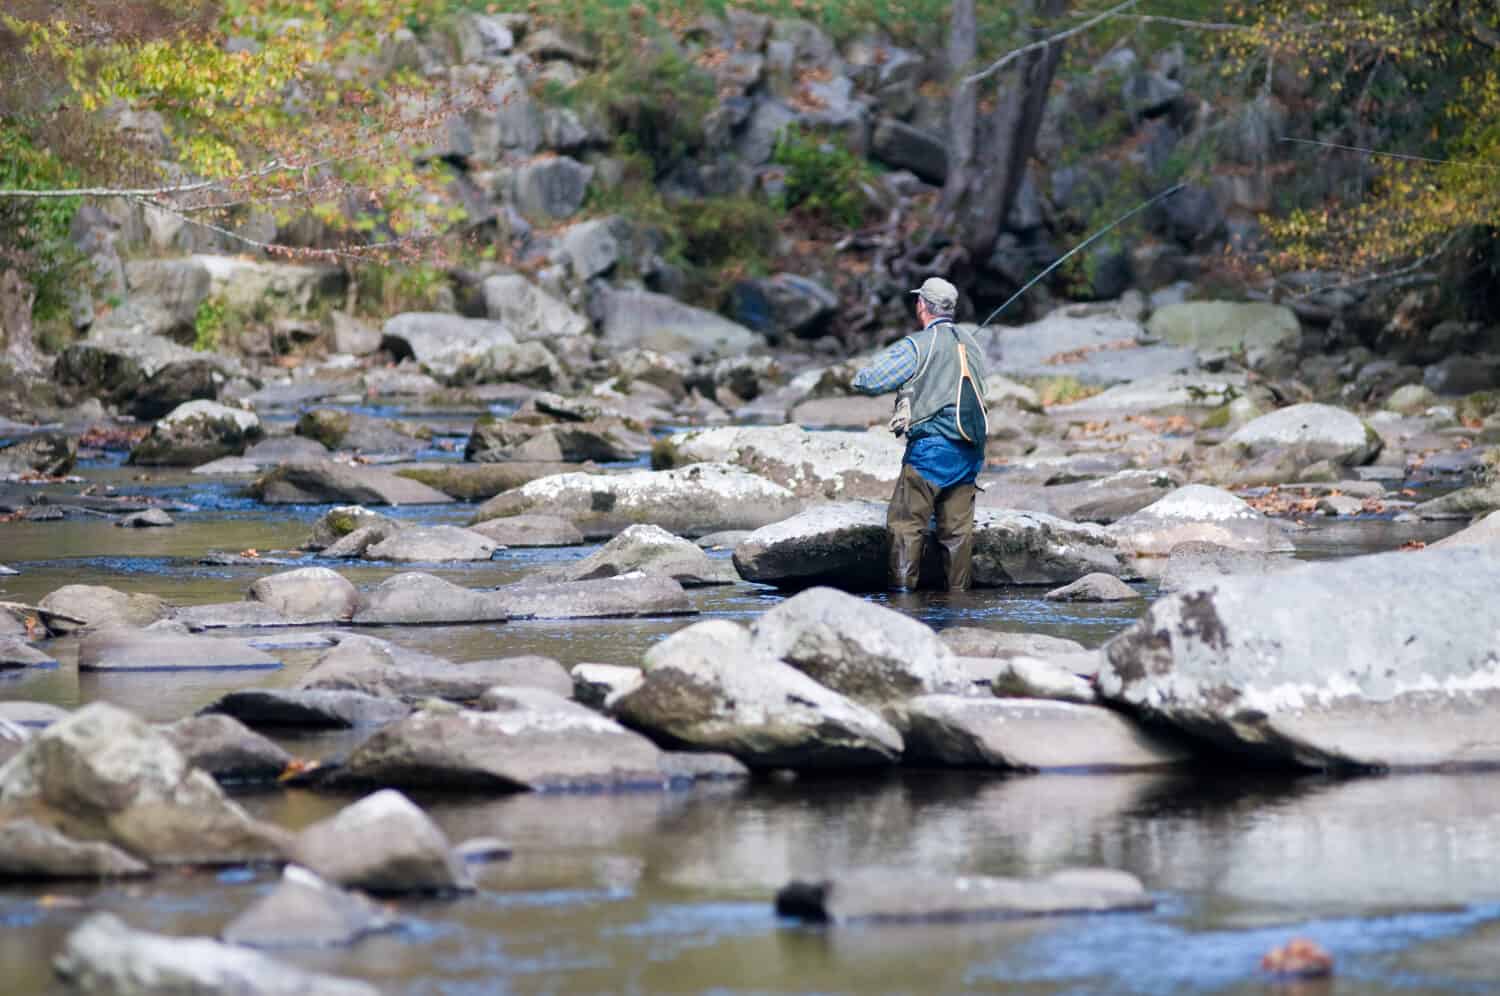 Fly fishing in the Little River of the Great Smoky Mountains National Park